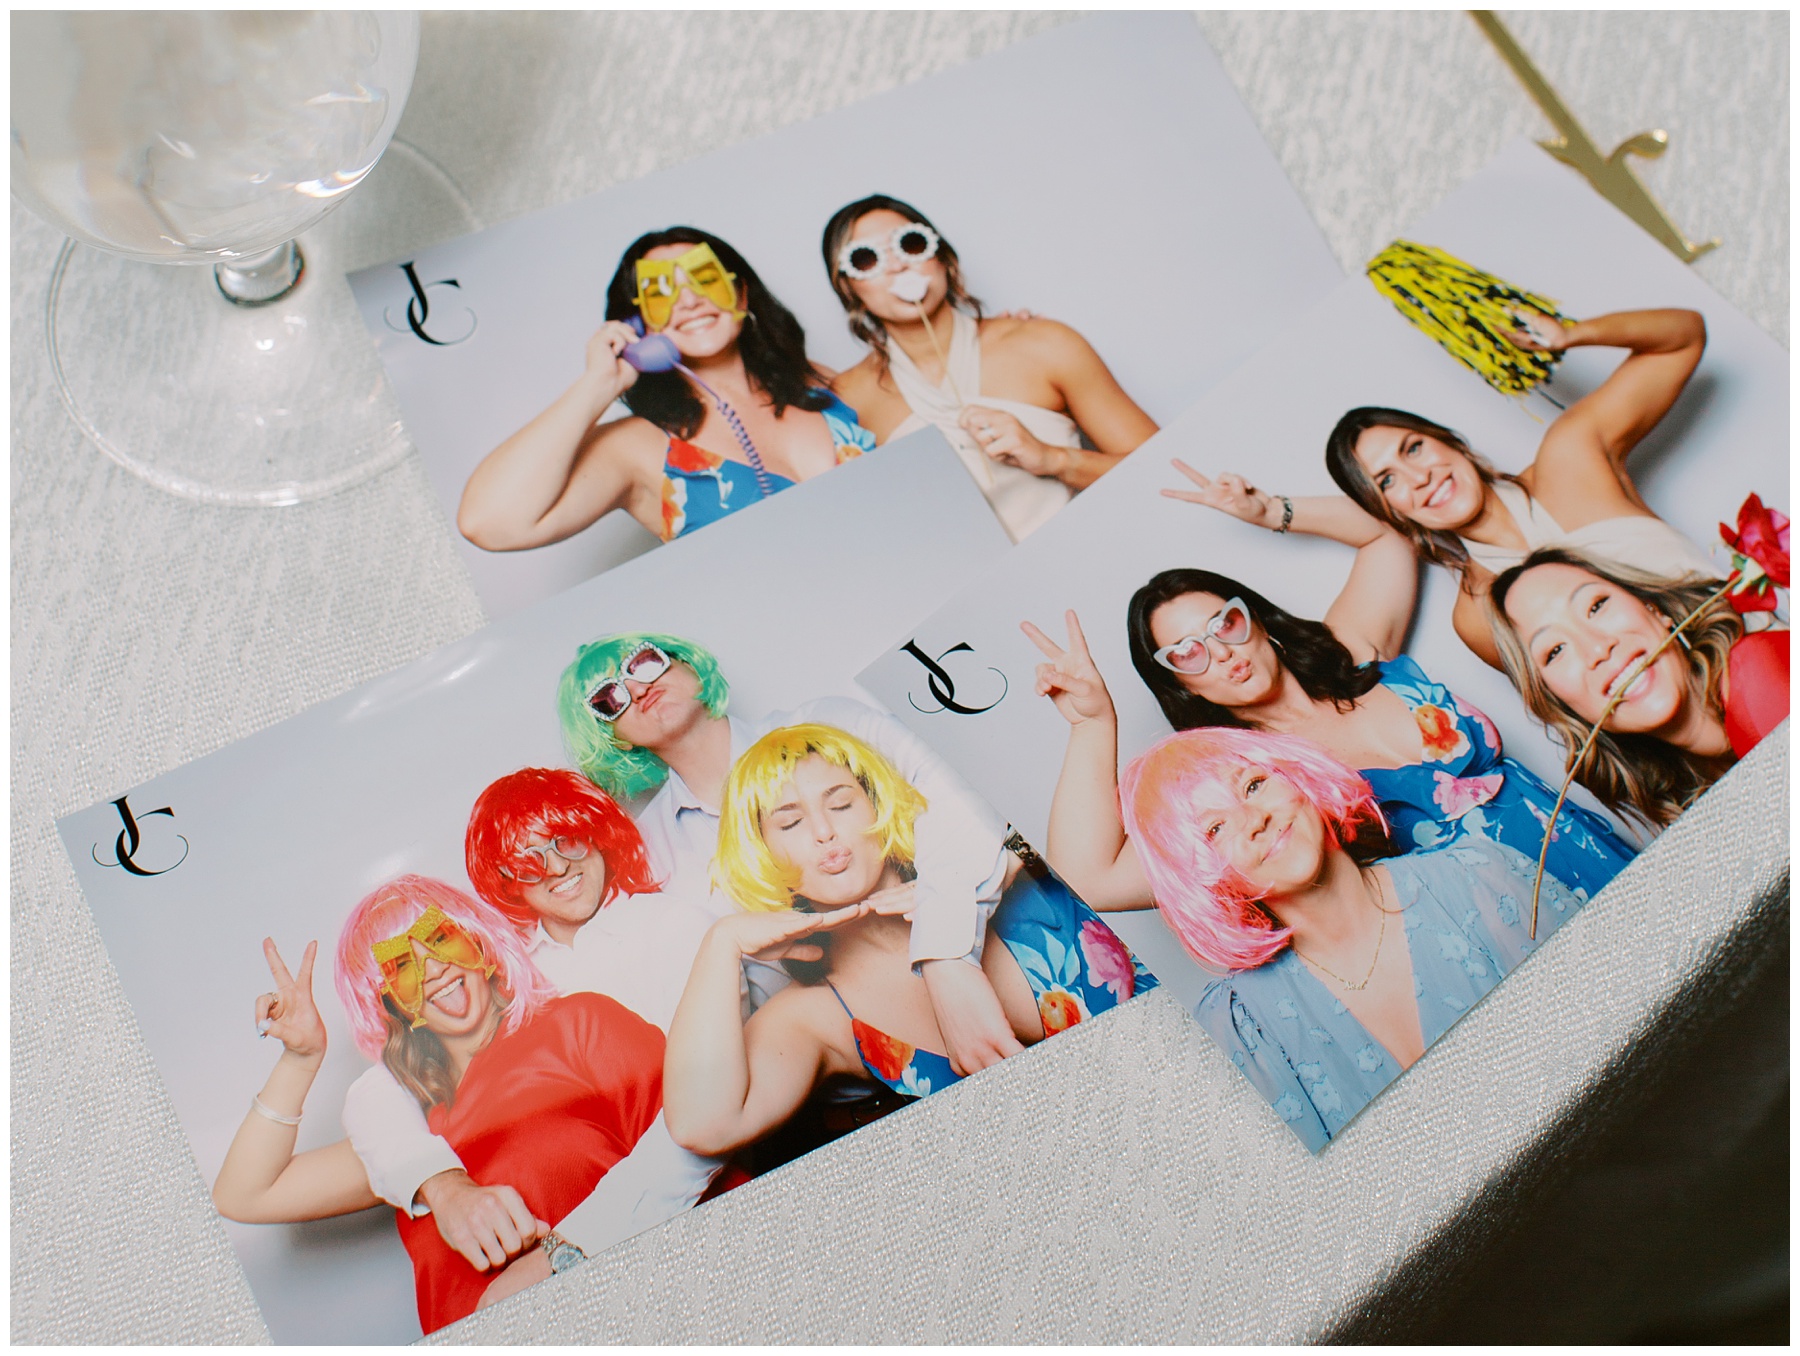 printed photos from photo booth from summer reception at The Bradford